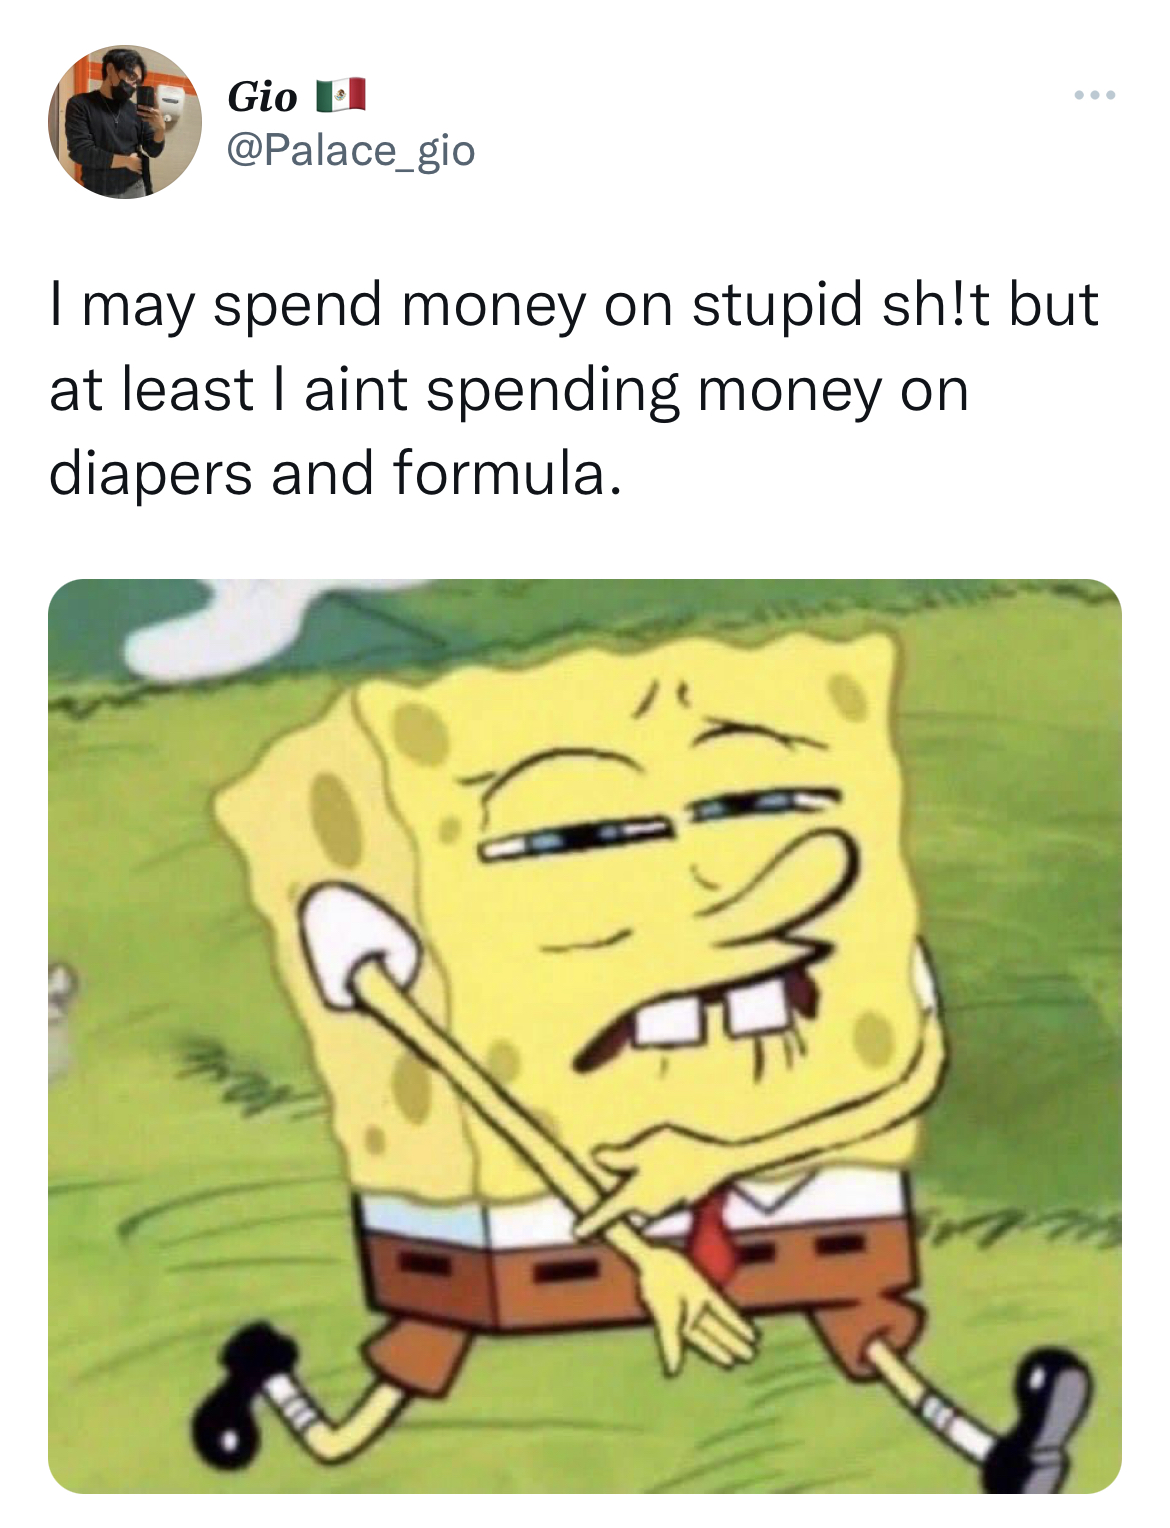 Savage and funny tweets - spongebob squarepants - Gio 1 I may spend money on stupid sh!t but at least I aint spending money on diapers and formula. n